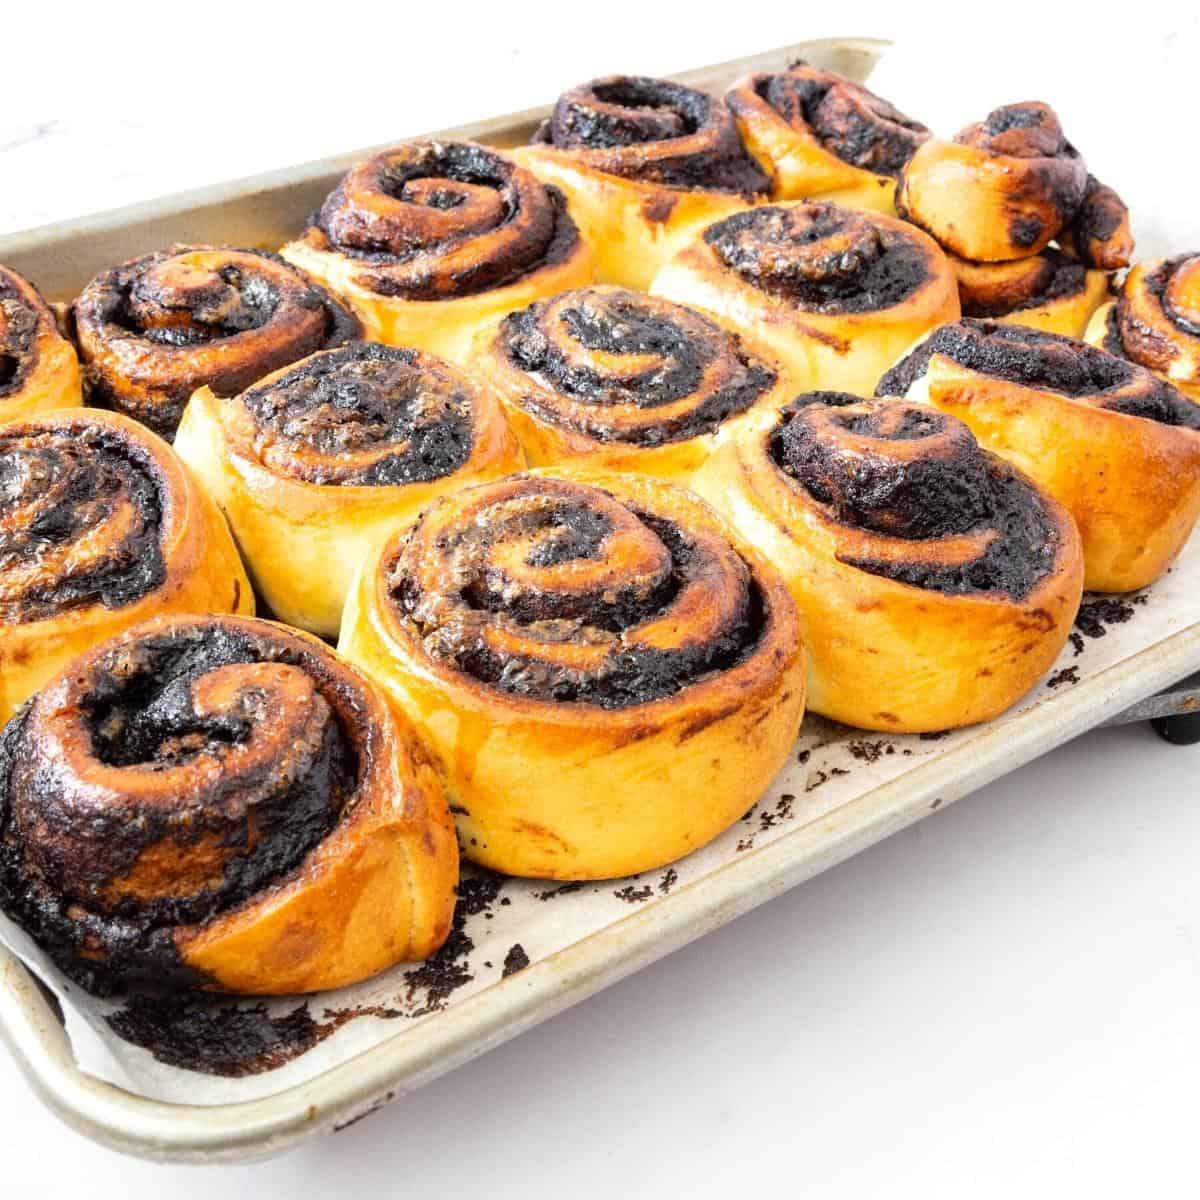 A baking tray with baked cinnamon chocolate rolls.